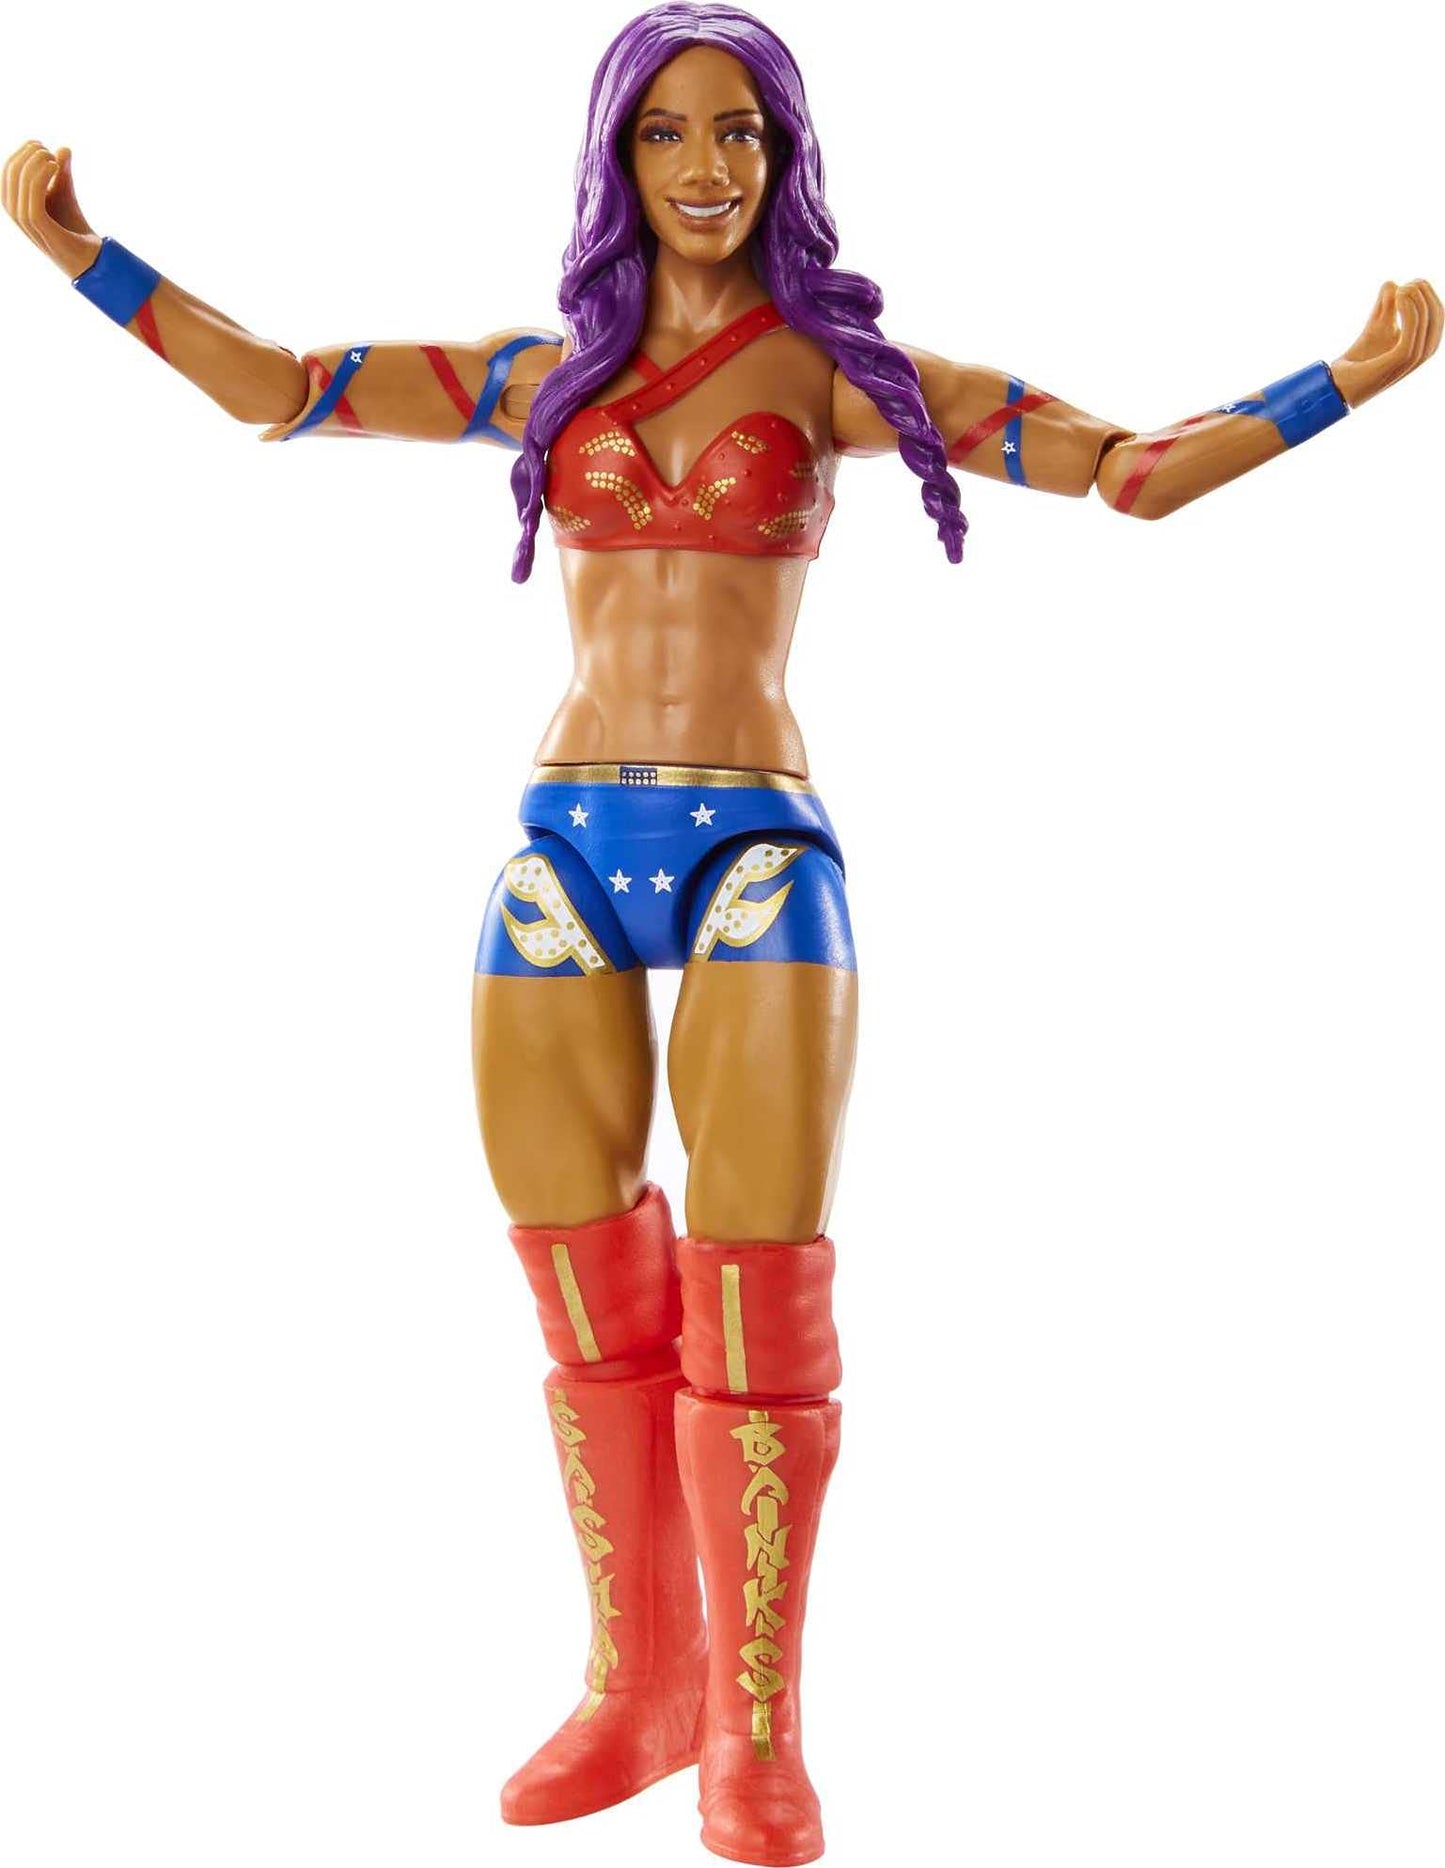 WWE Action Figure in 6-inch Scale with Articulation & Ring Gear